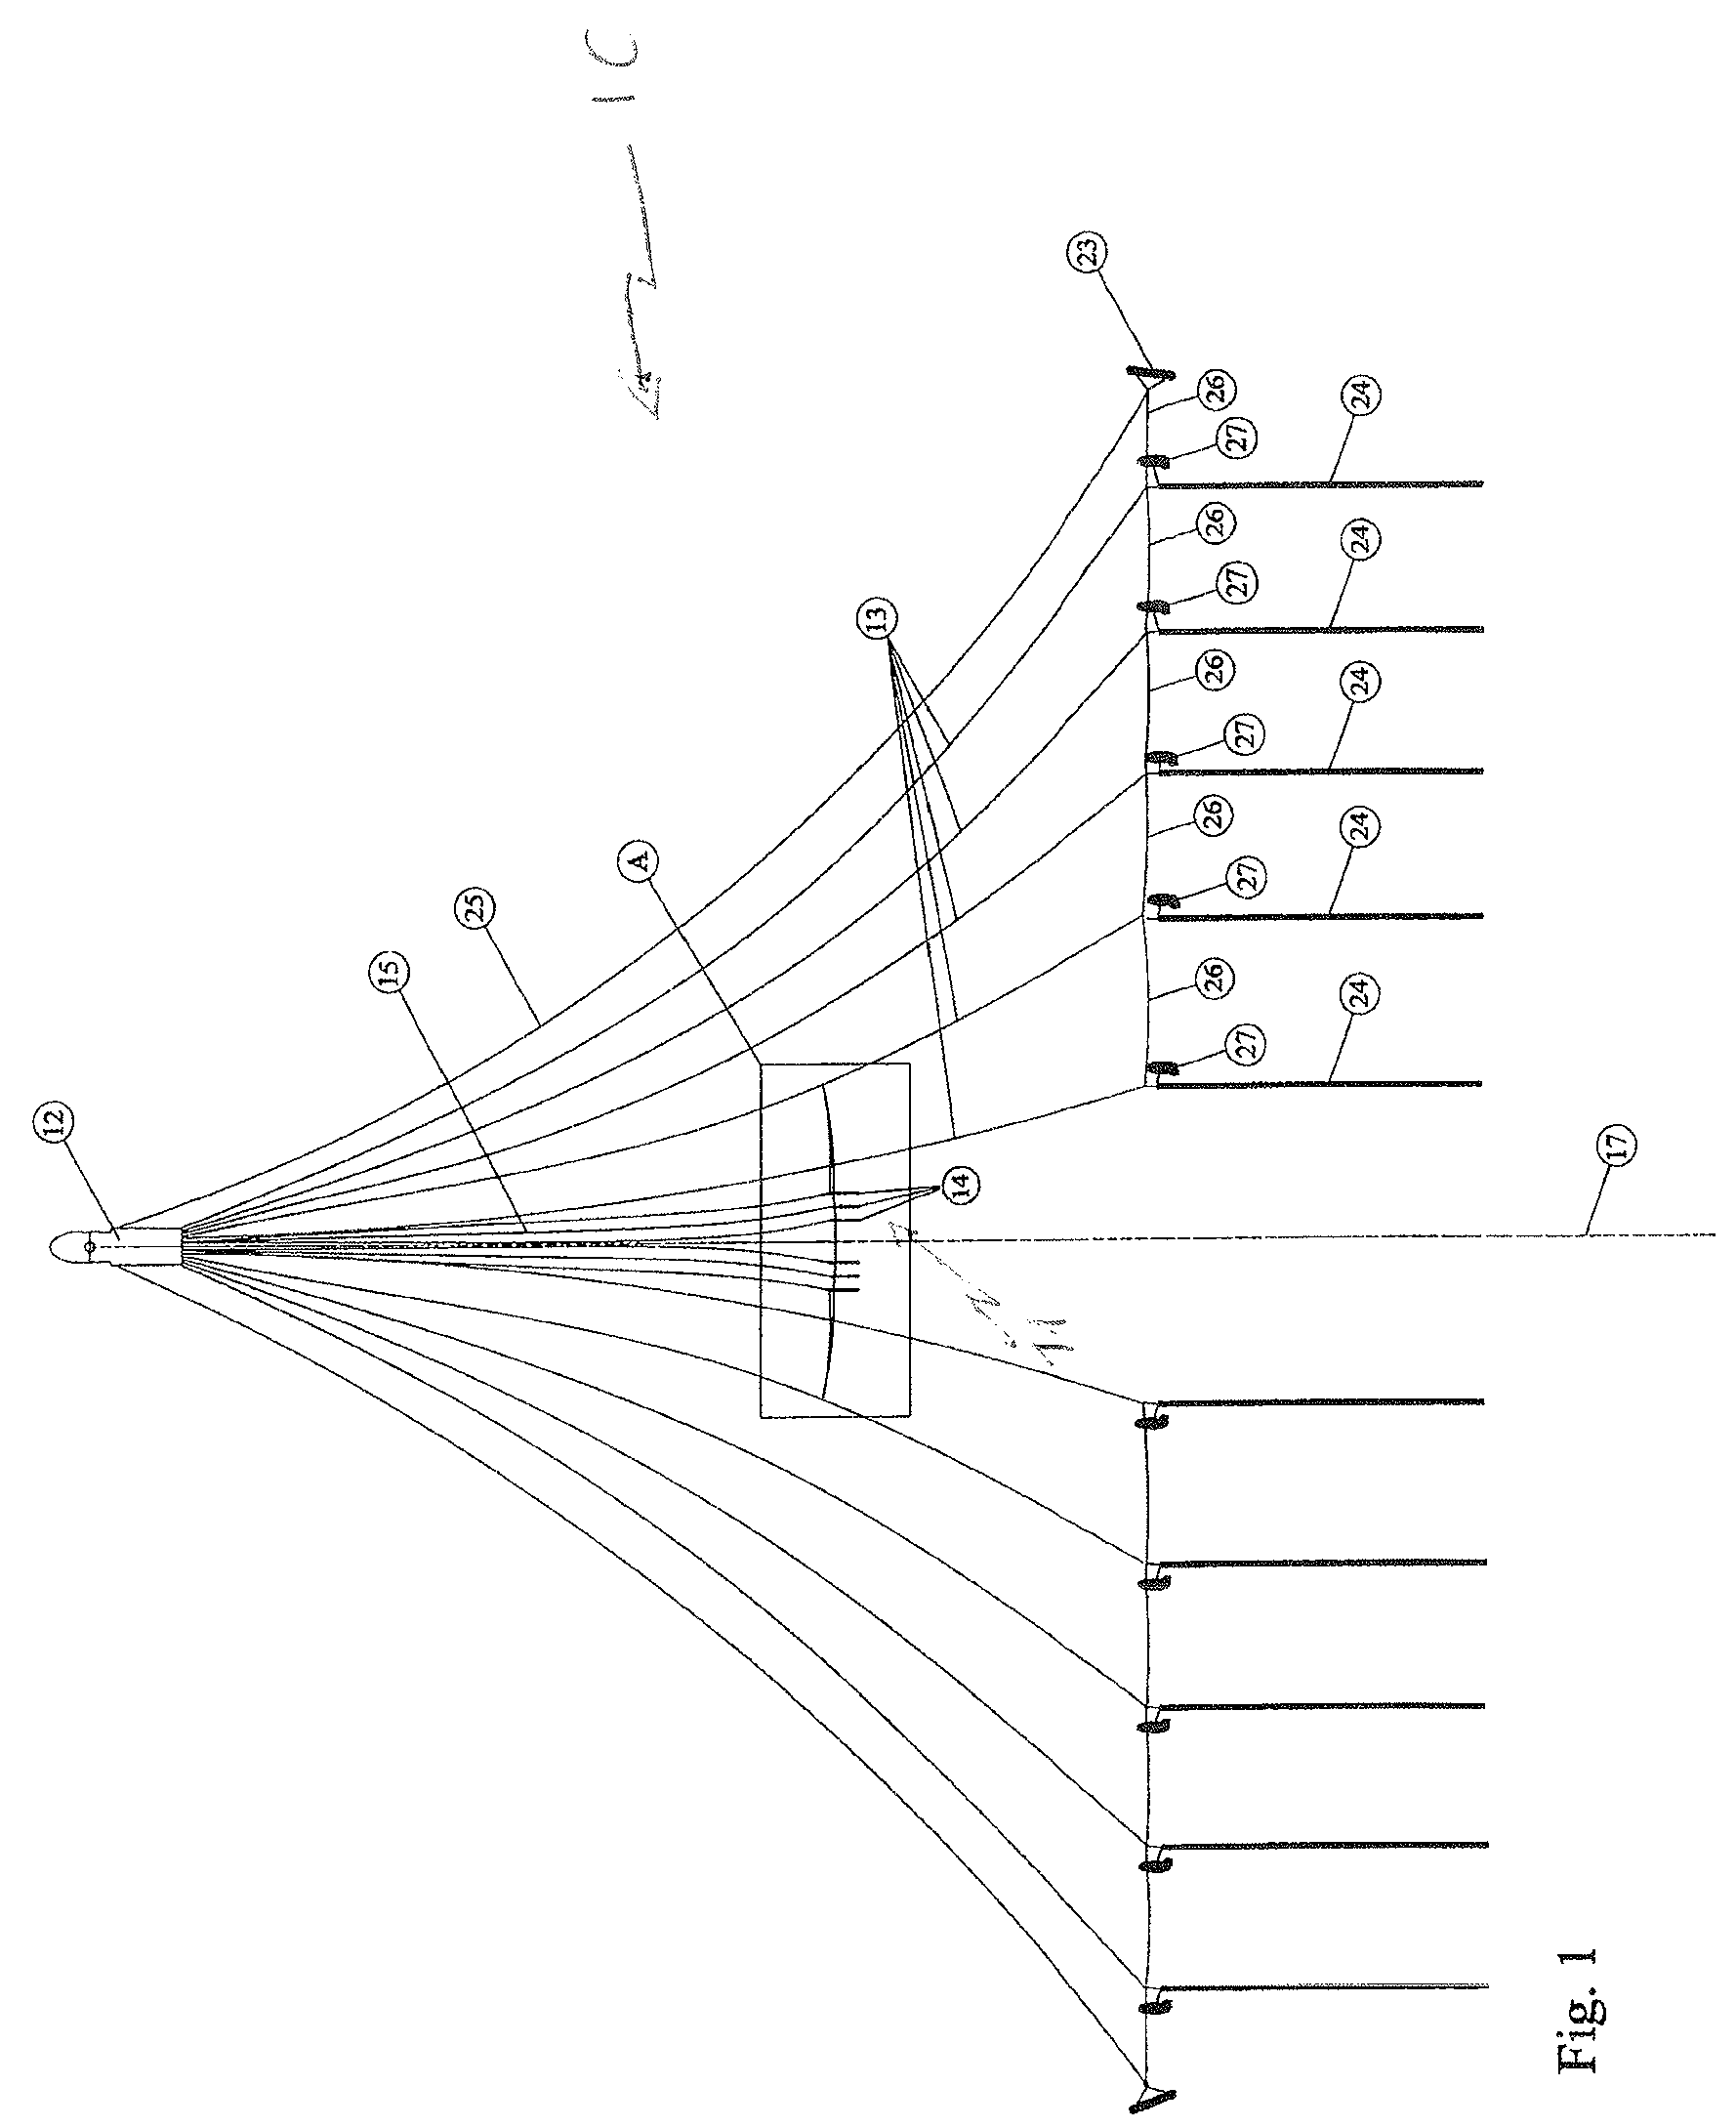 Marine seismic survey system and method for active steering of source arrays in such a system